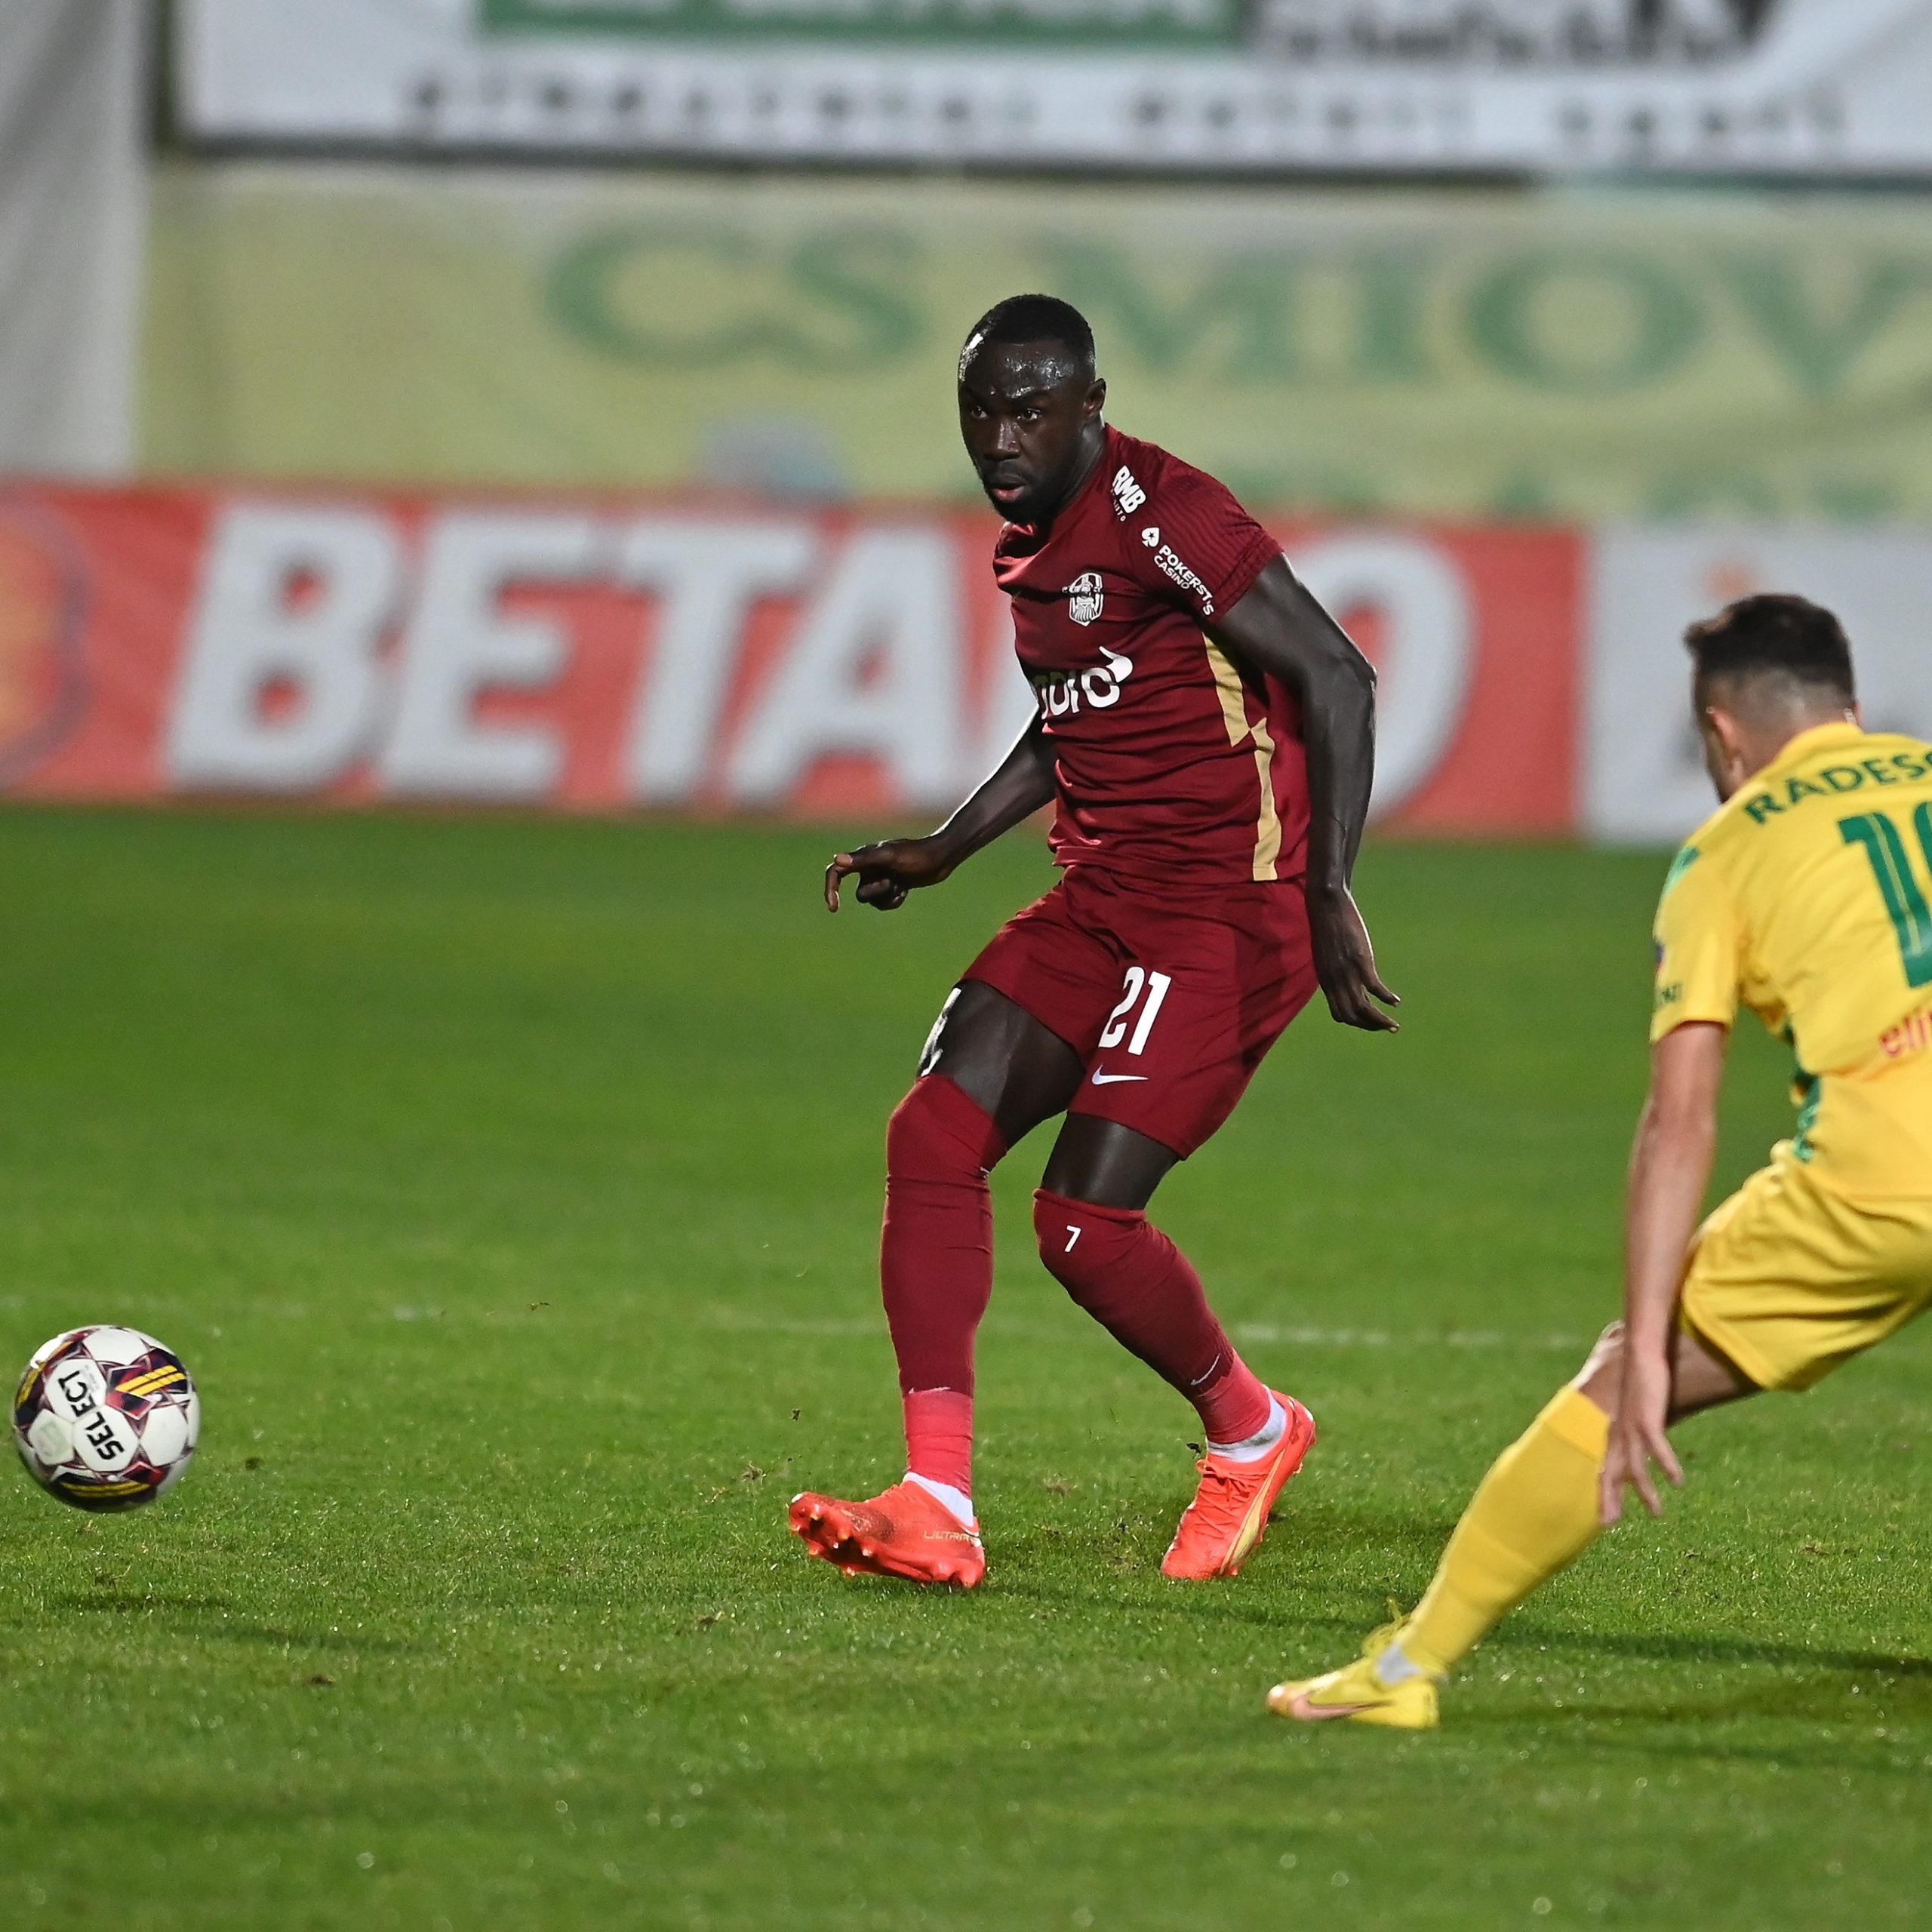 Nana Boateng scores in CFR Cluj's draw with